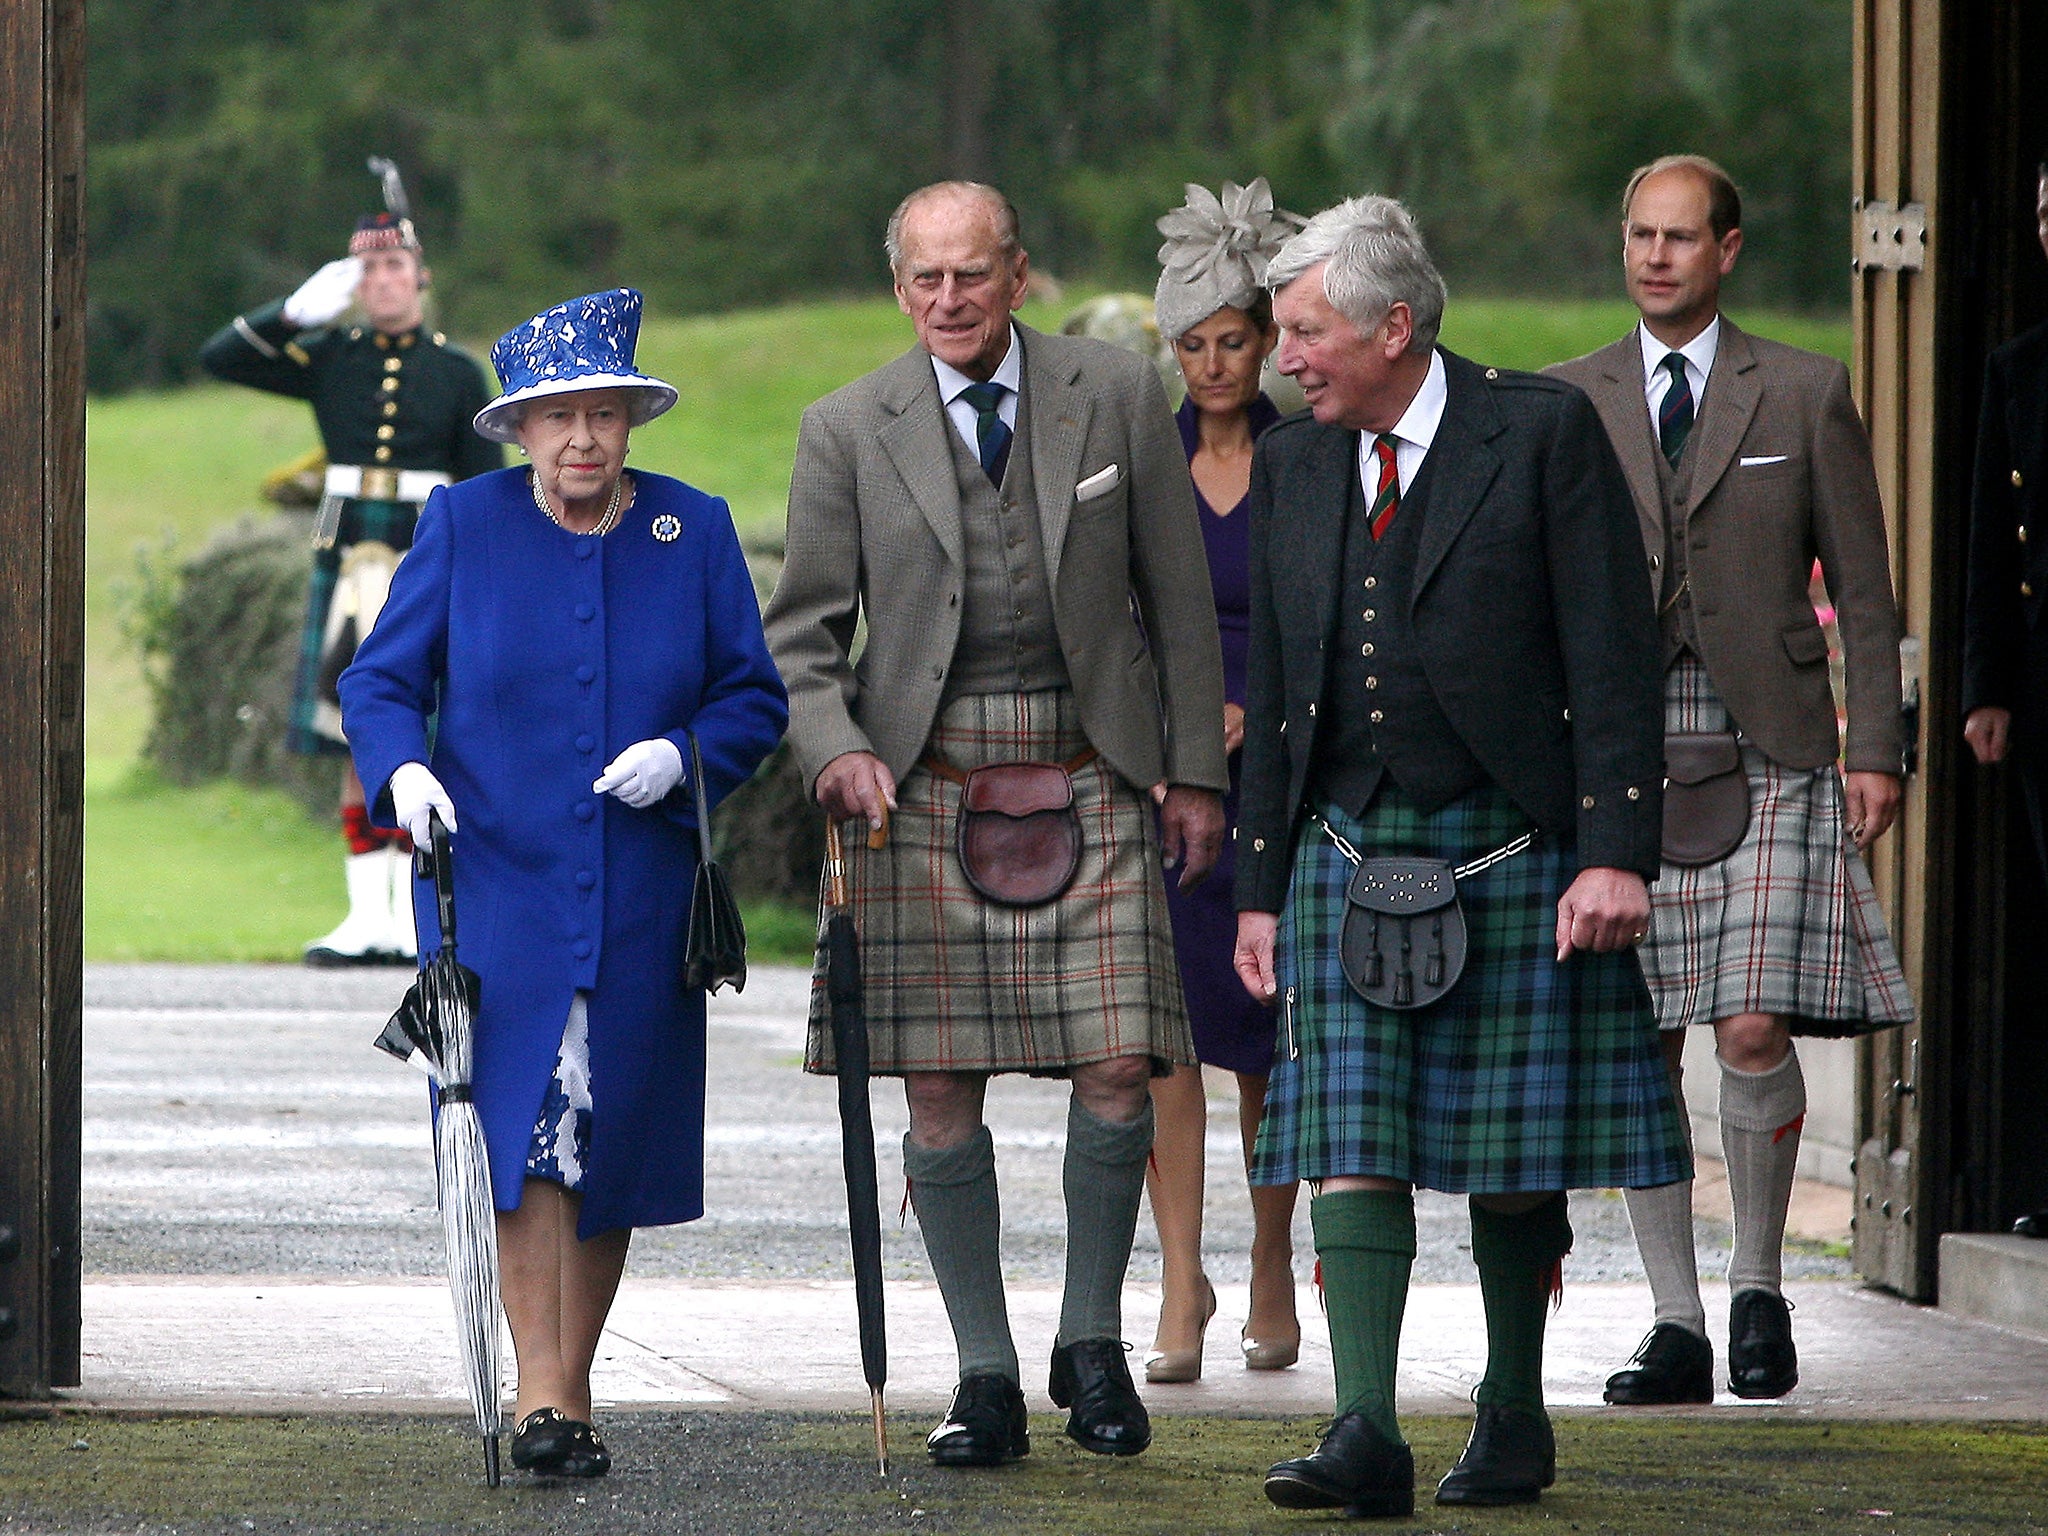 The Queen and Prince Philip attend a garden party at Balmoral Castle in August 2012